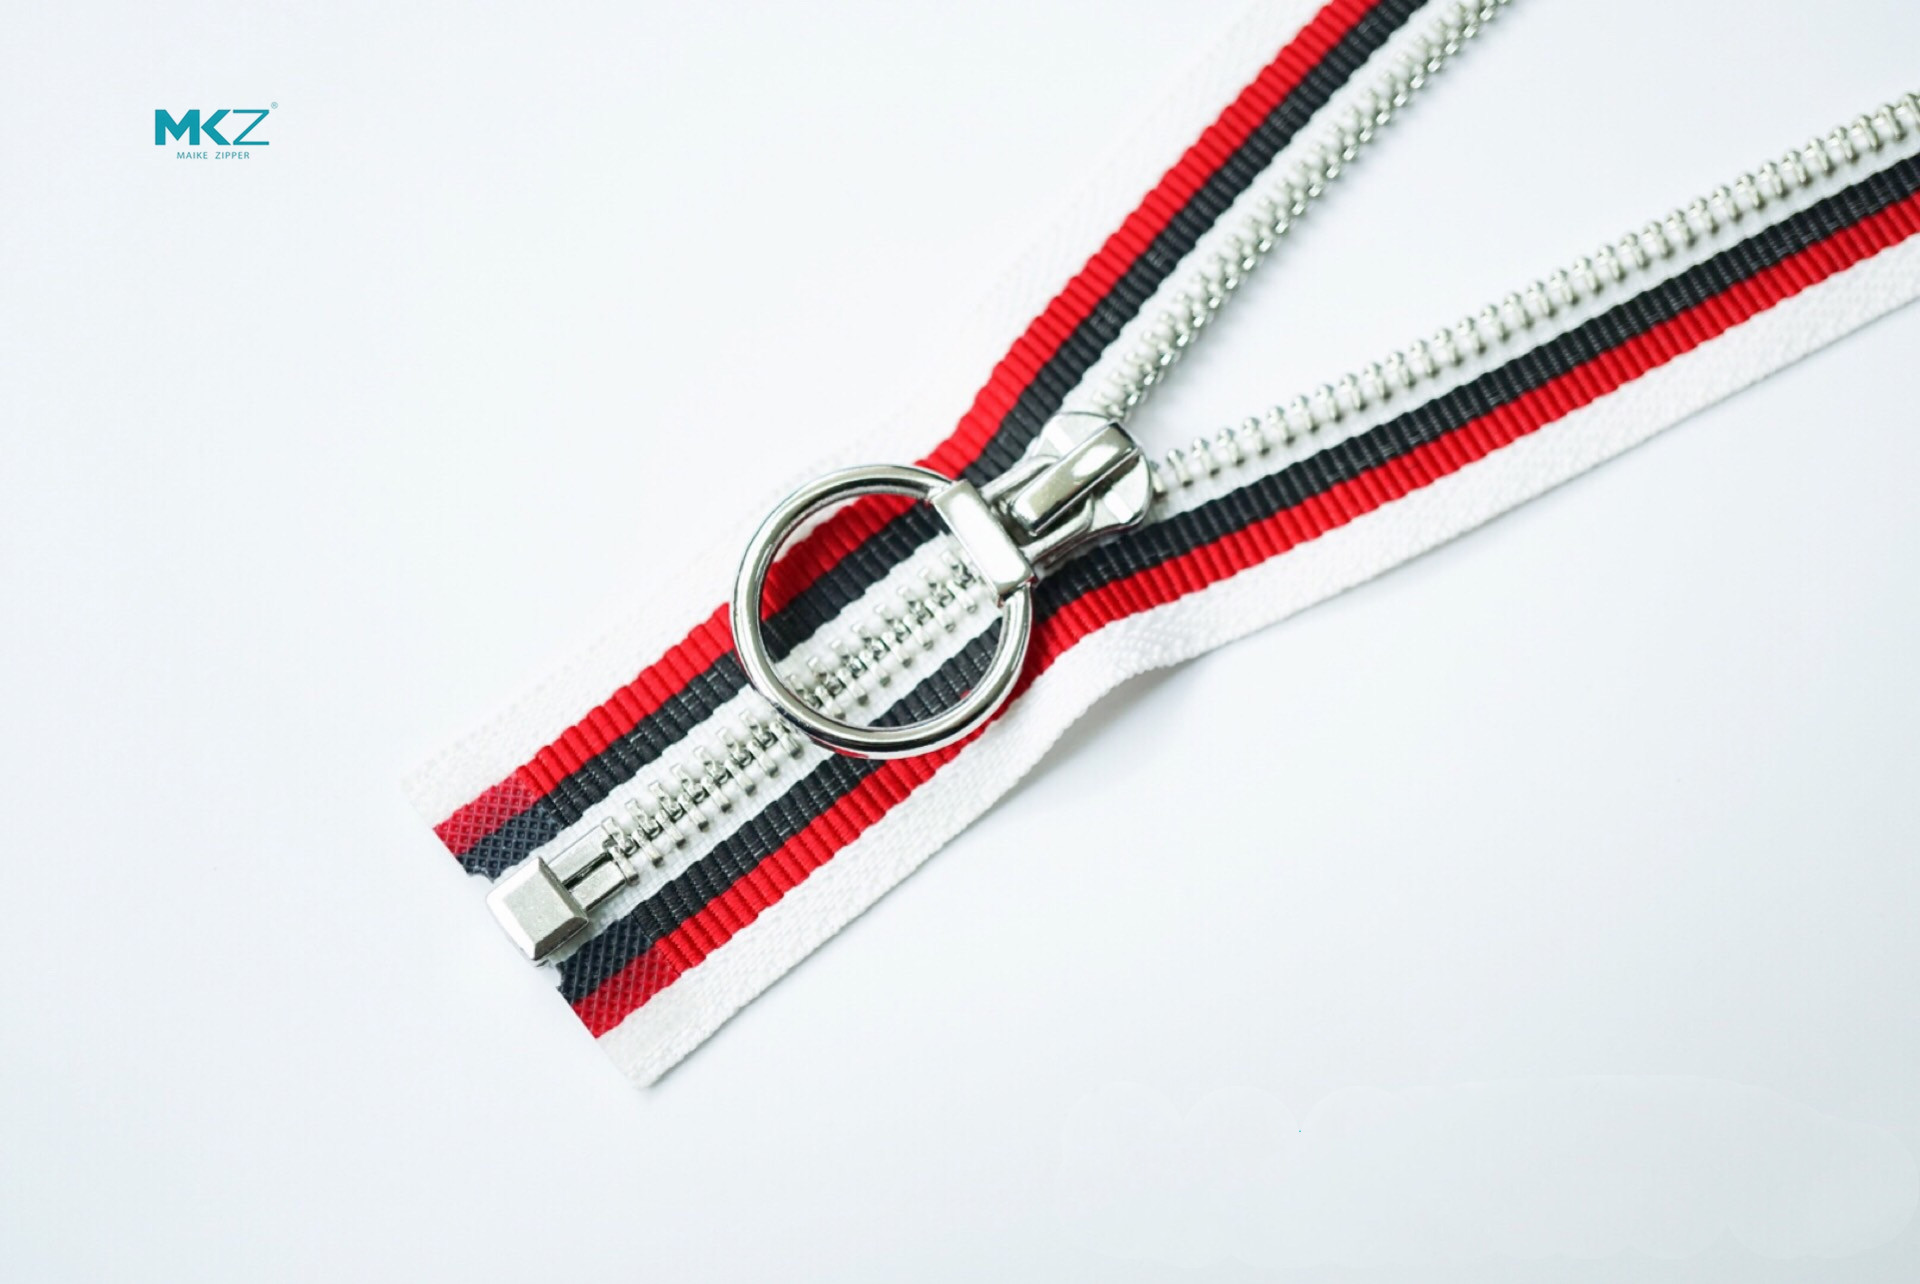 Buy Ring Pull Head Striped Heavy Duty Metal Zippers Platinum Plated at wholesale prices